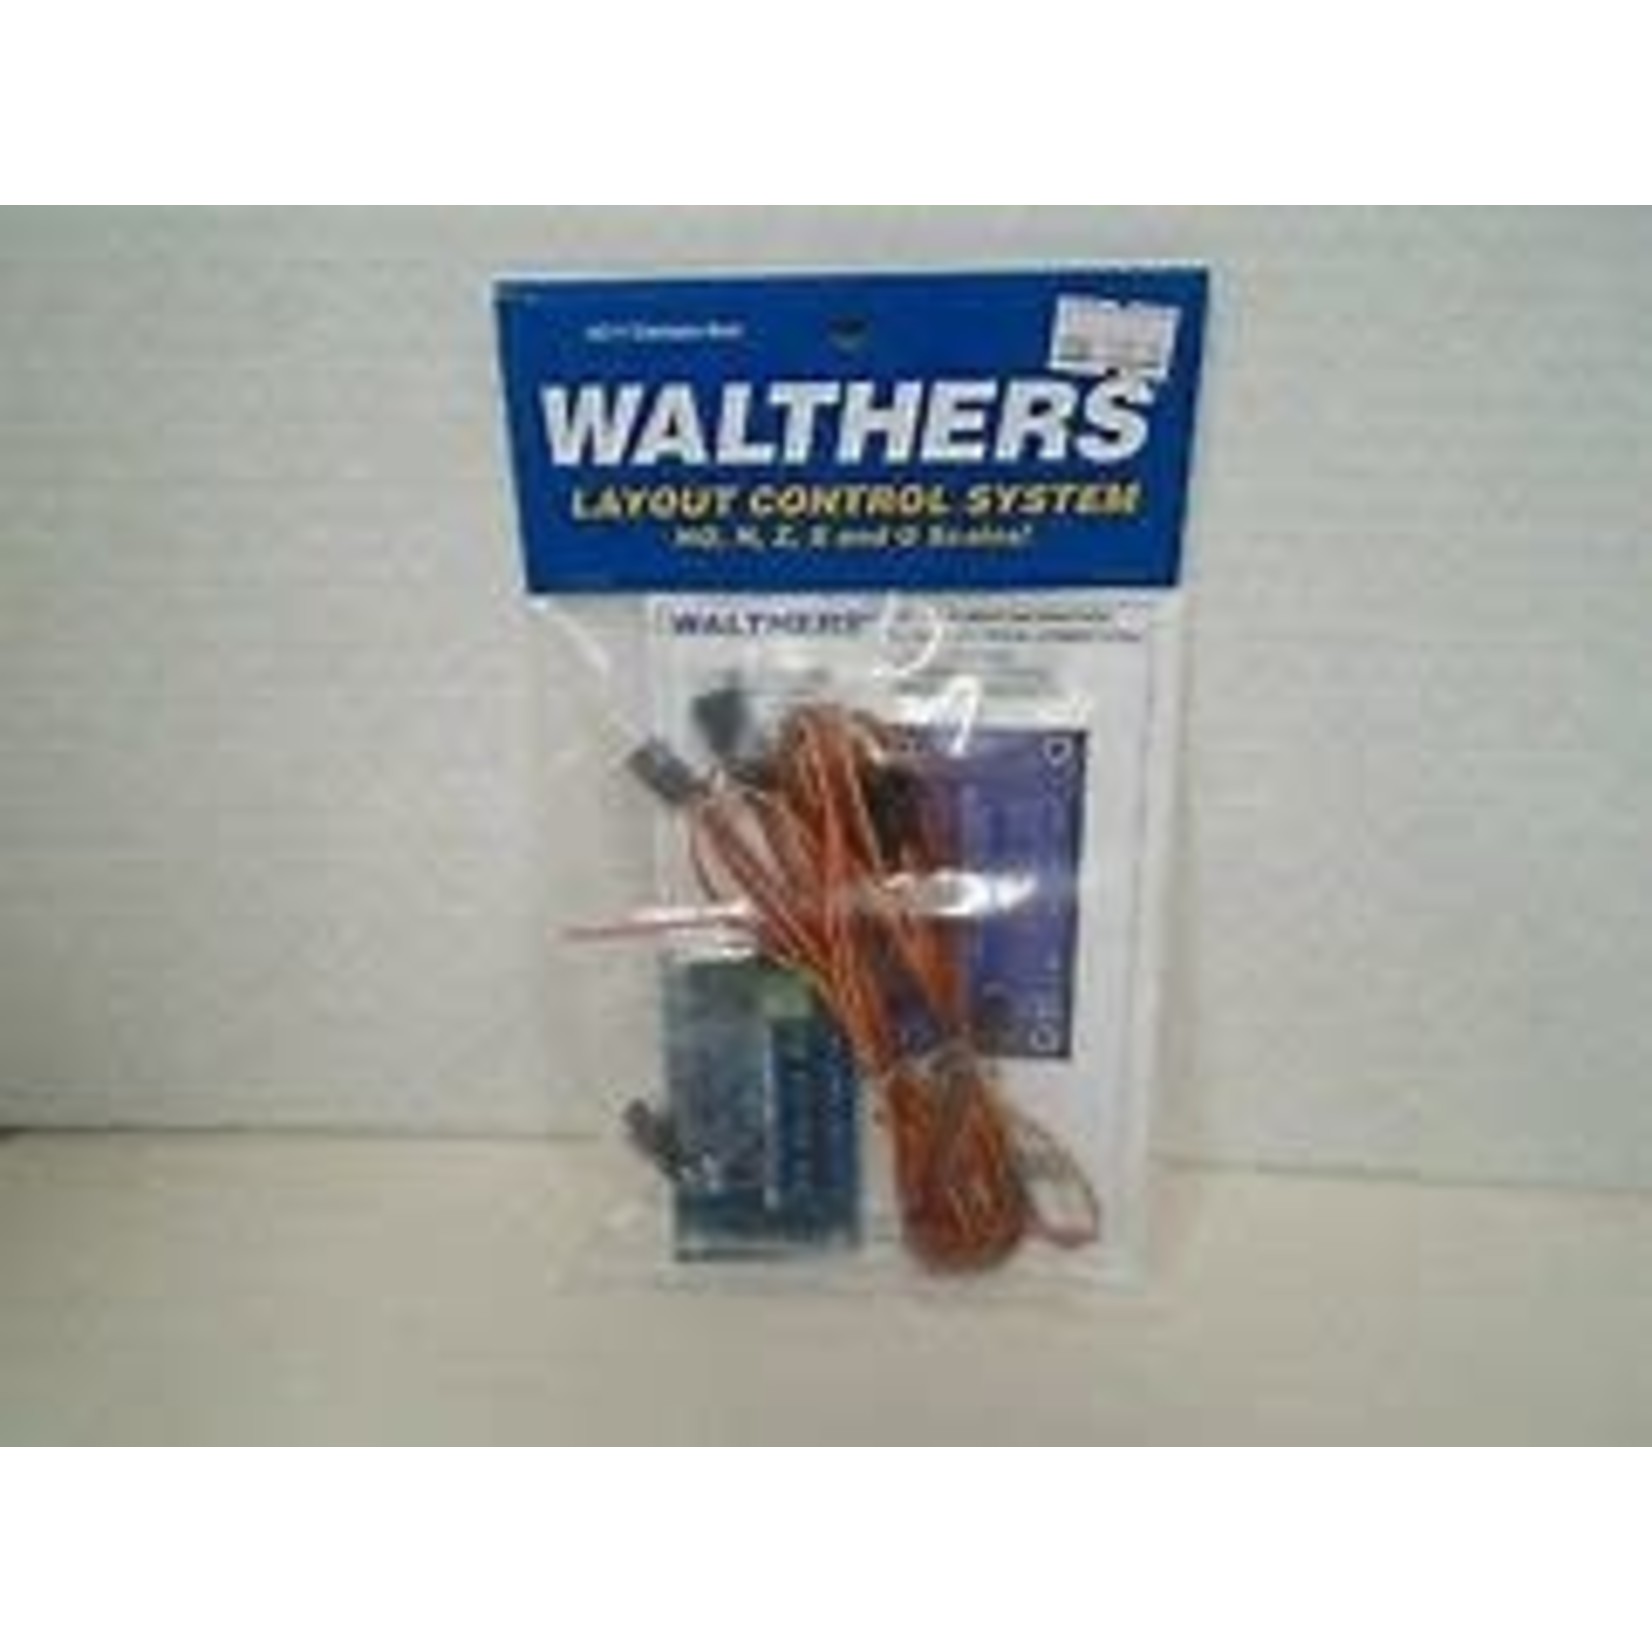 Walthers Layout Control System (Any Scale)